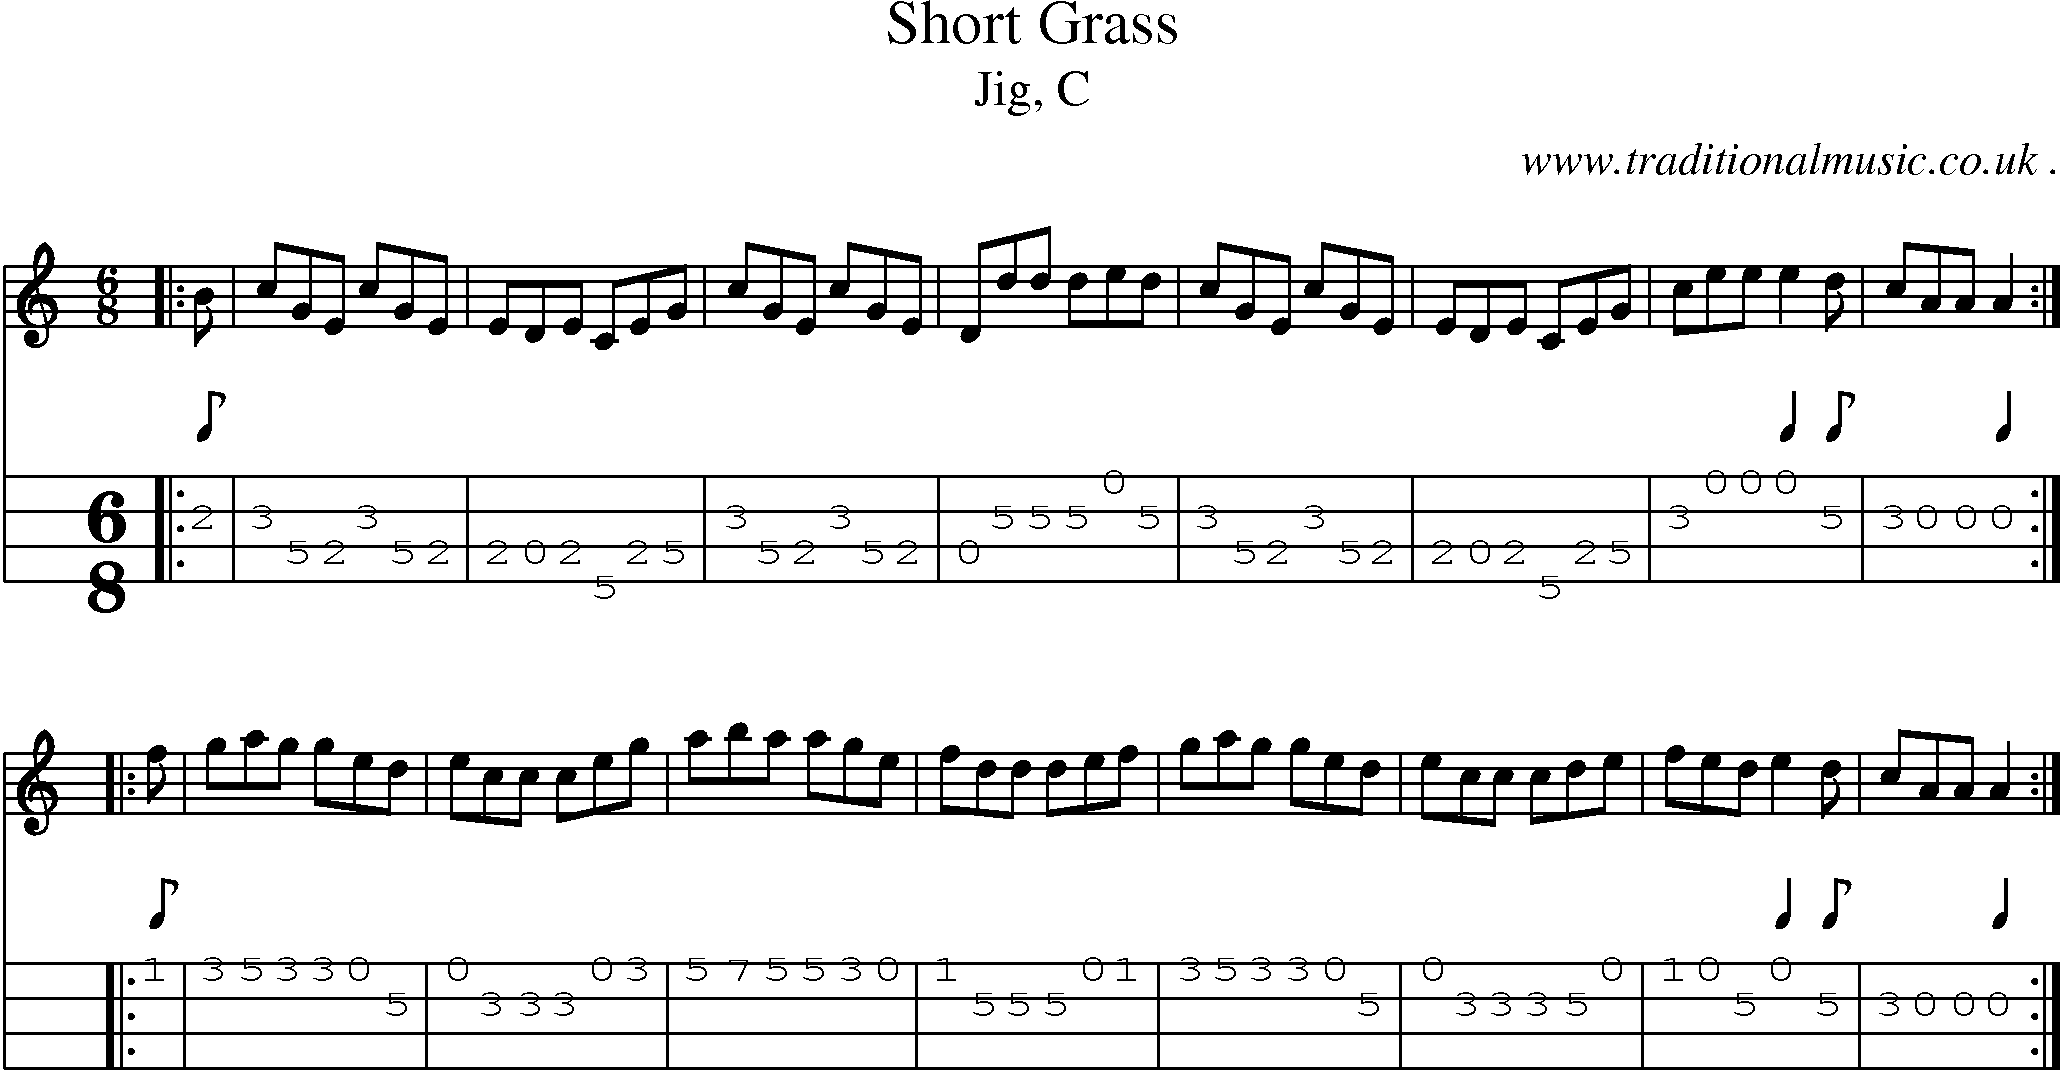 Sheet-music  score, Chords and Mandolin Tabs for Short Grass